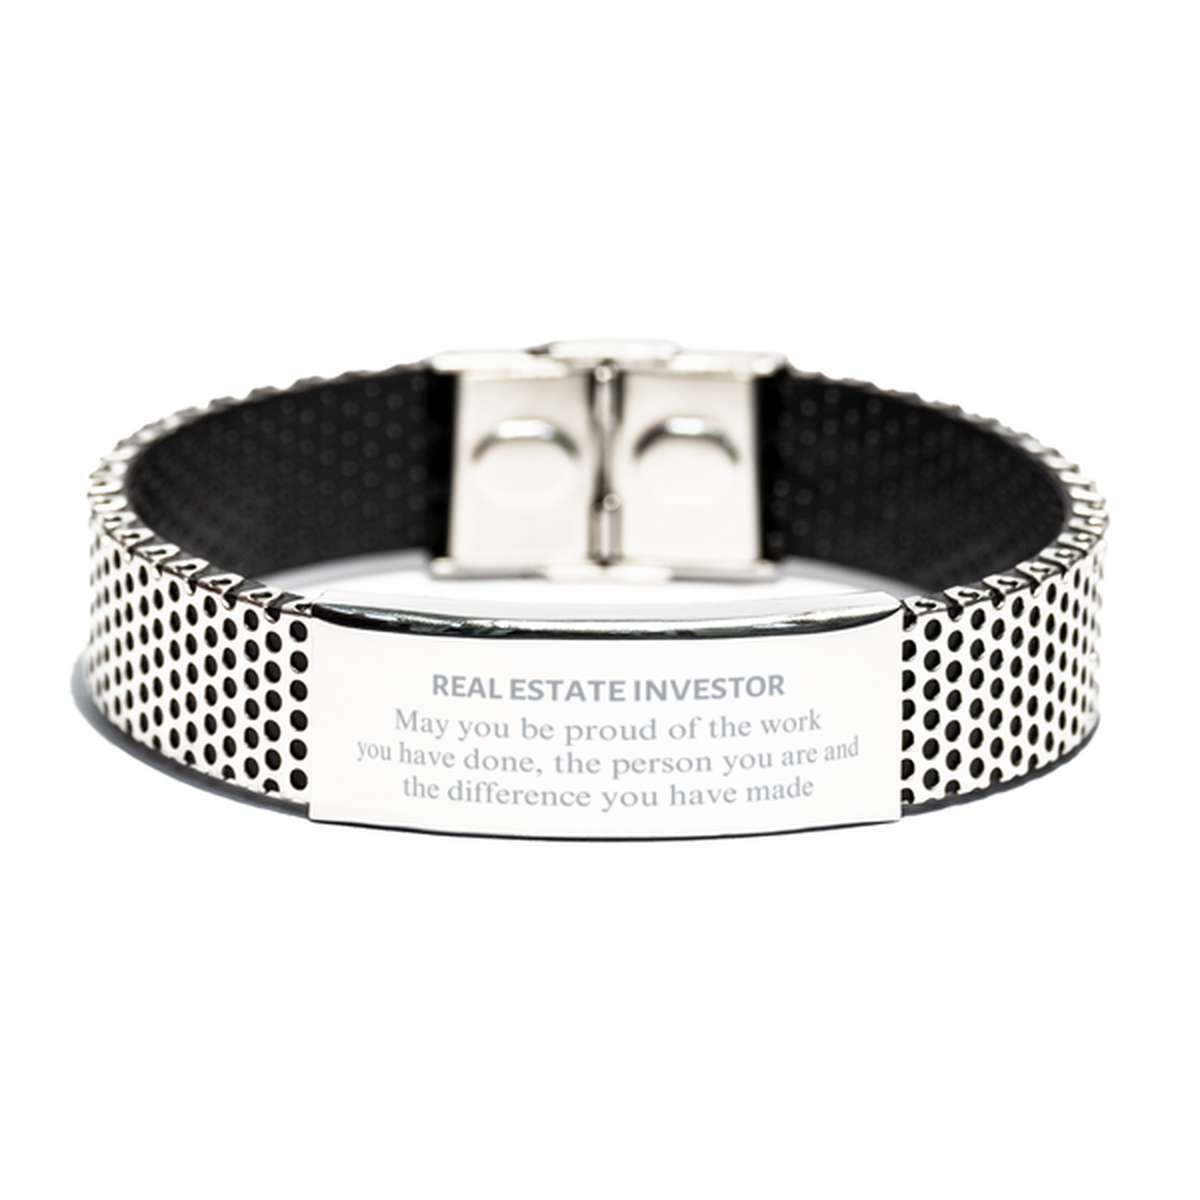 Real Estate Investor May you be proud of the work you have done, Retirement Real Estate Investor Stainless Steel Bracelet for Colleague Appreciation Gifts Amazing for Real Estate Investor